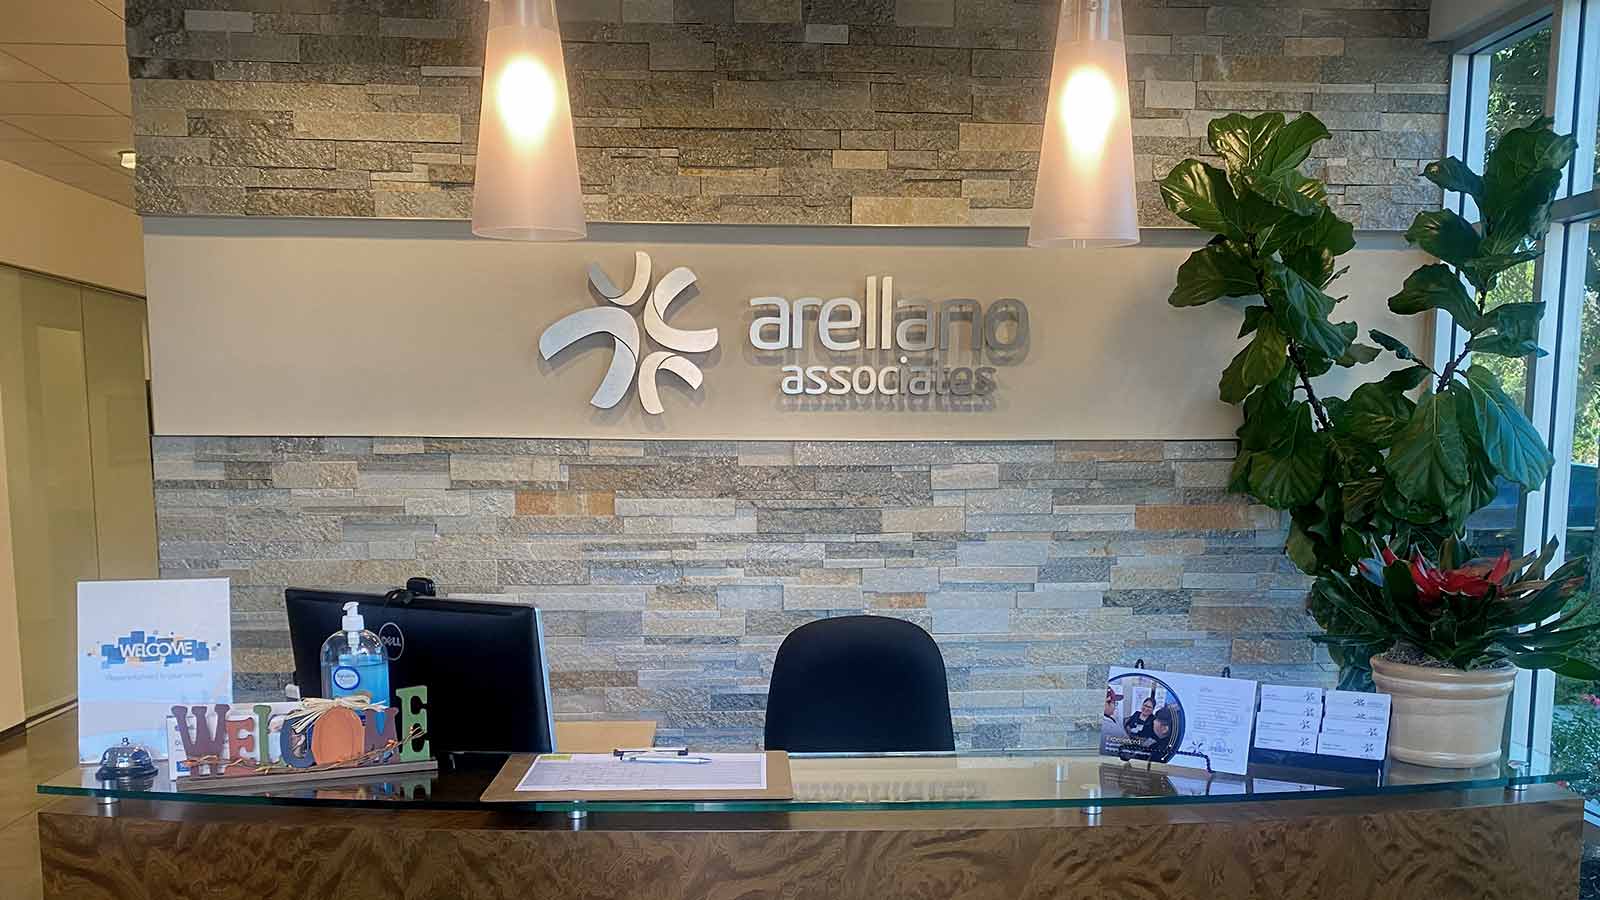 arellano associates office signs installed on the lobby wall